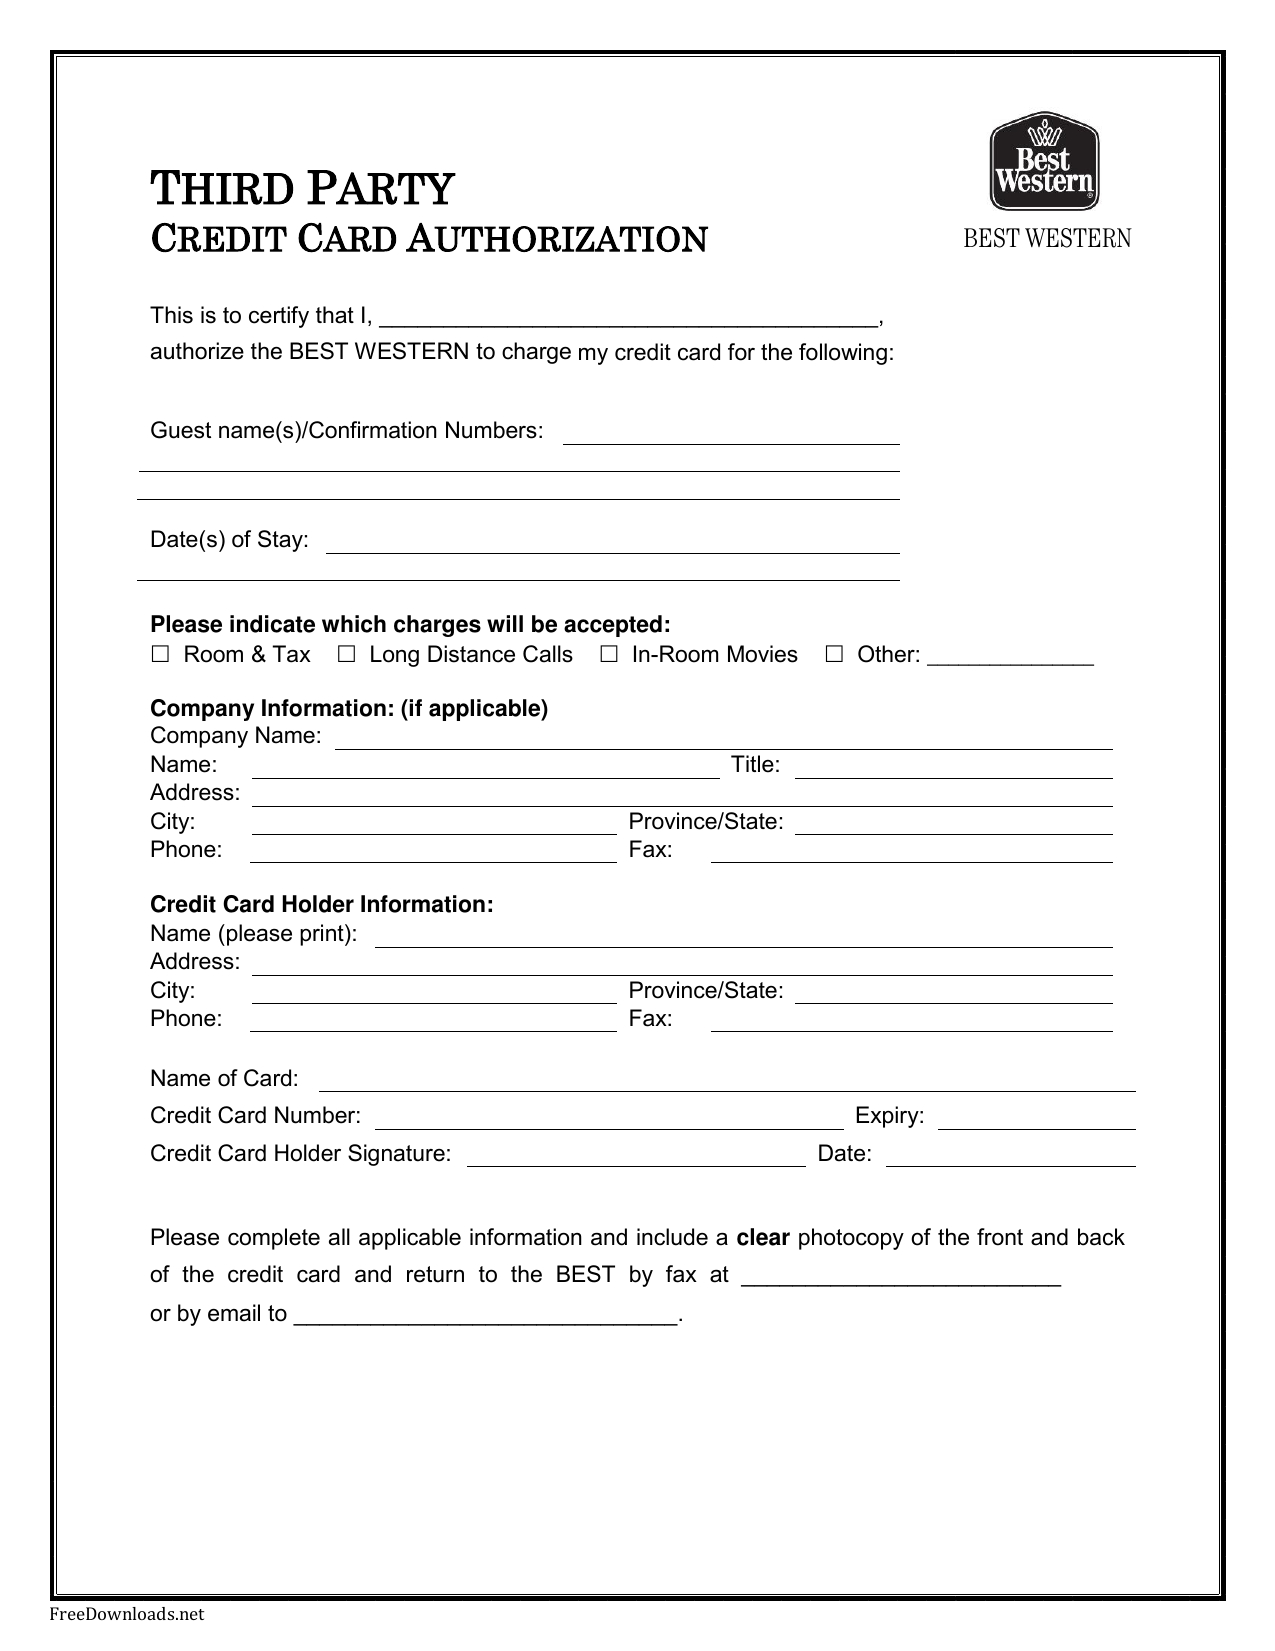 Credit Card Authorization Form Template Pdf Colonarsd7 Pertaining To Credit Card 3325